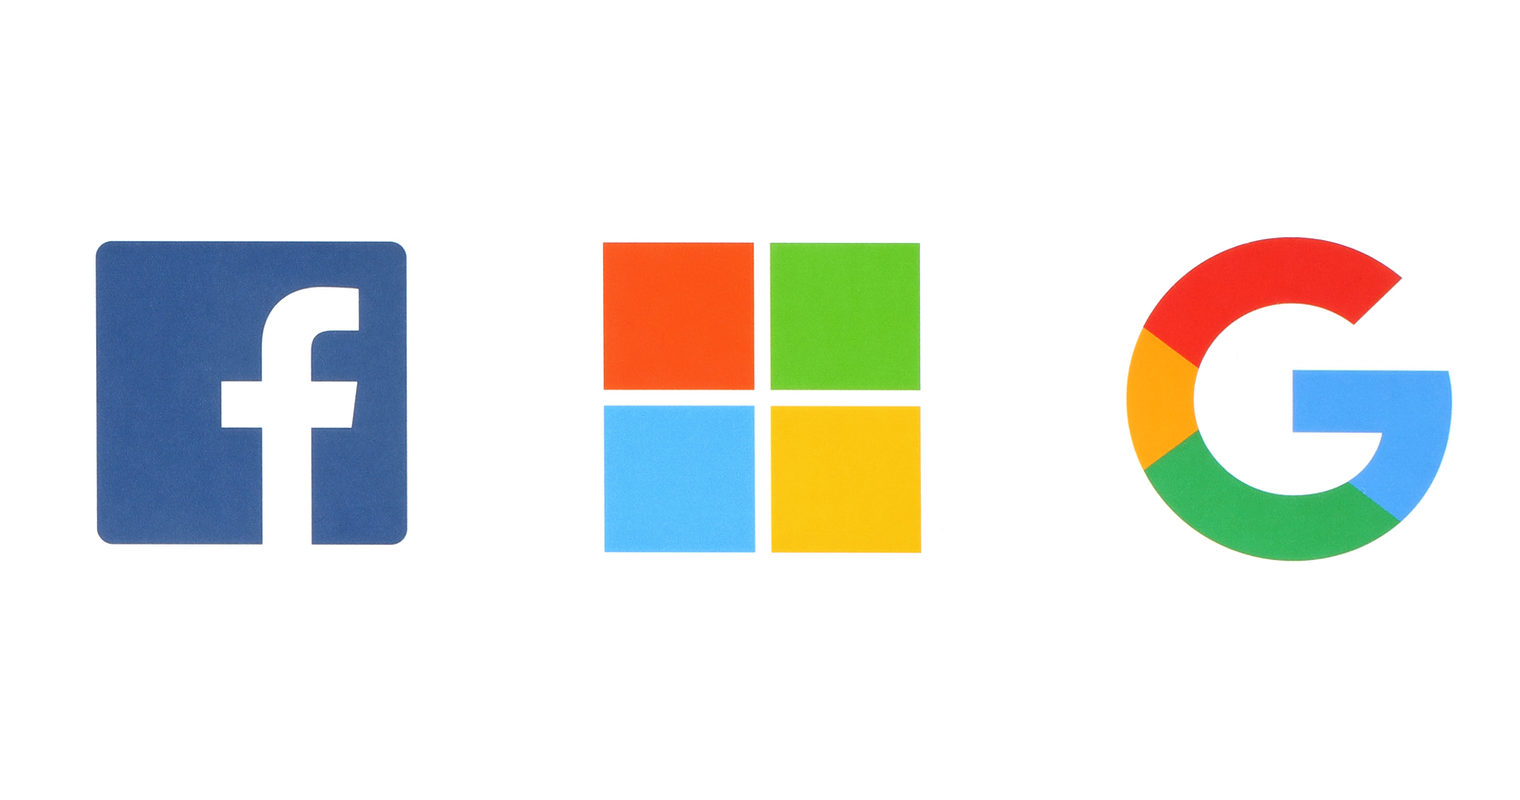 Google, Facebook, and Microsoft Release Q1 Earnings with Similar Stories